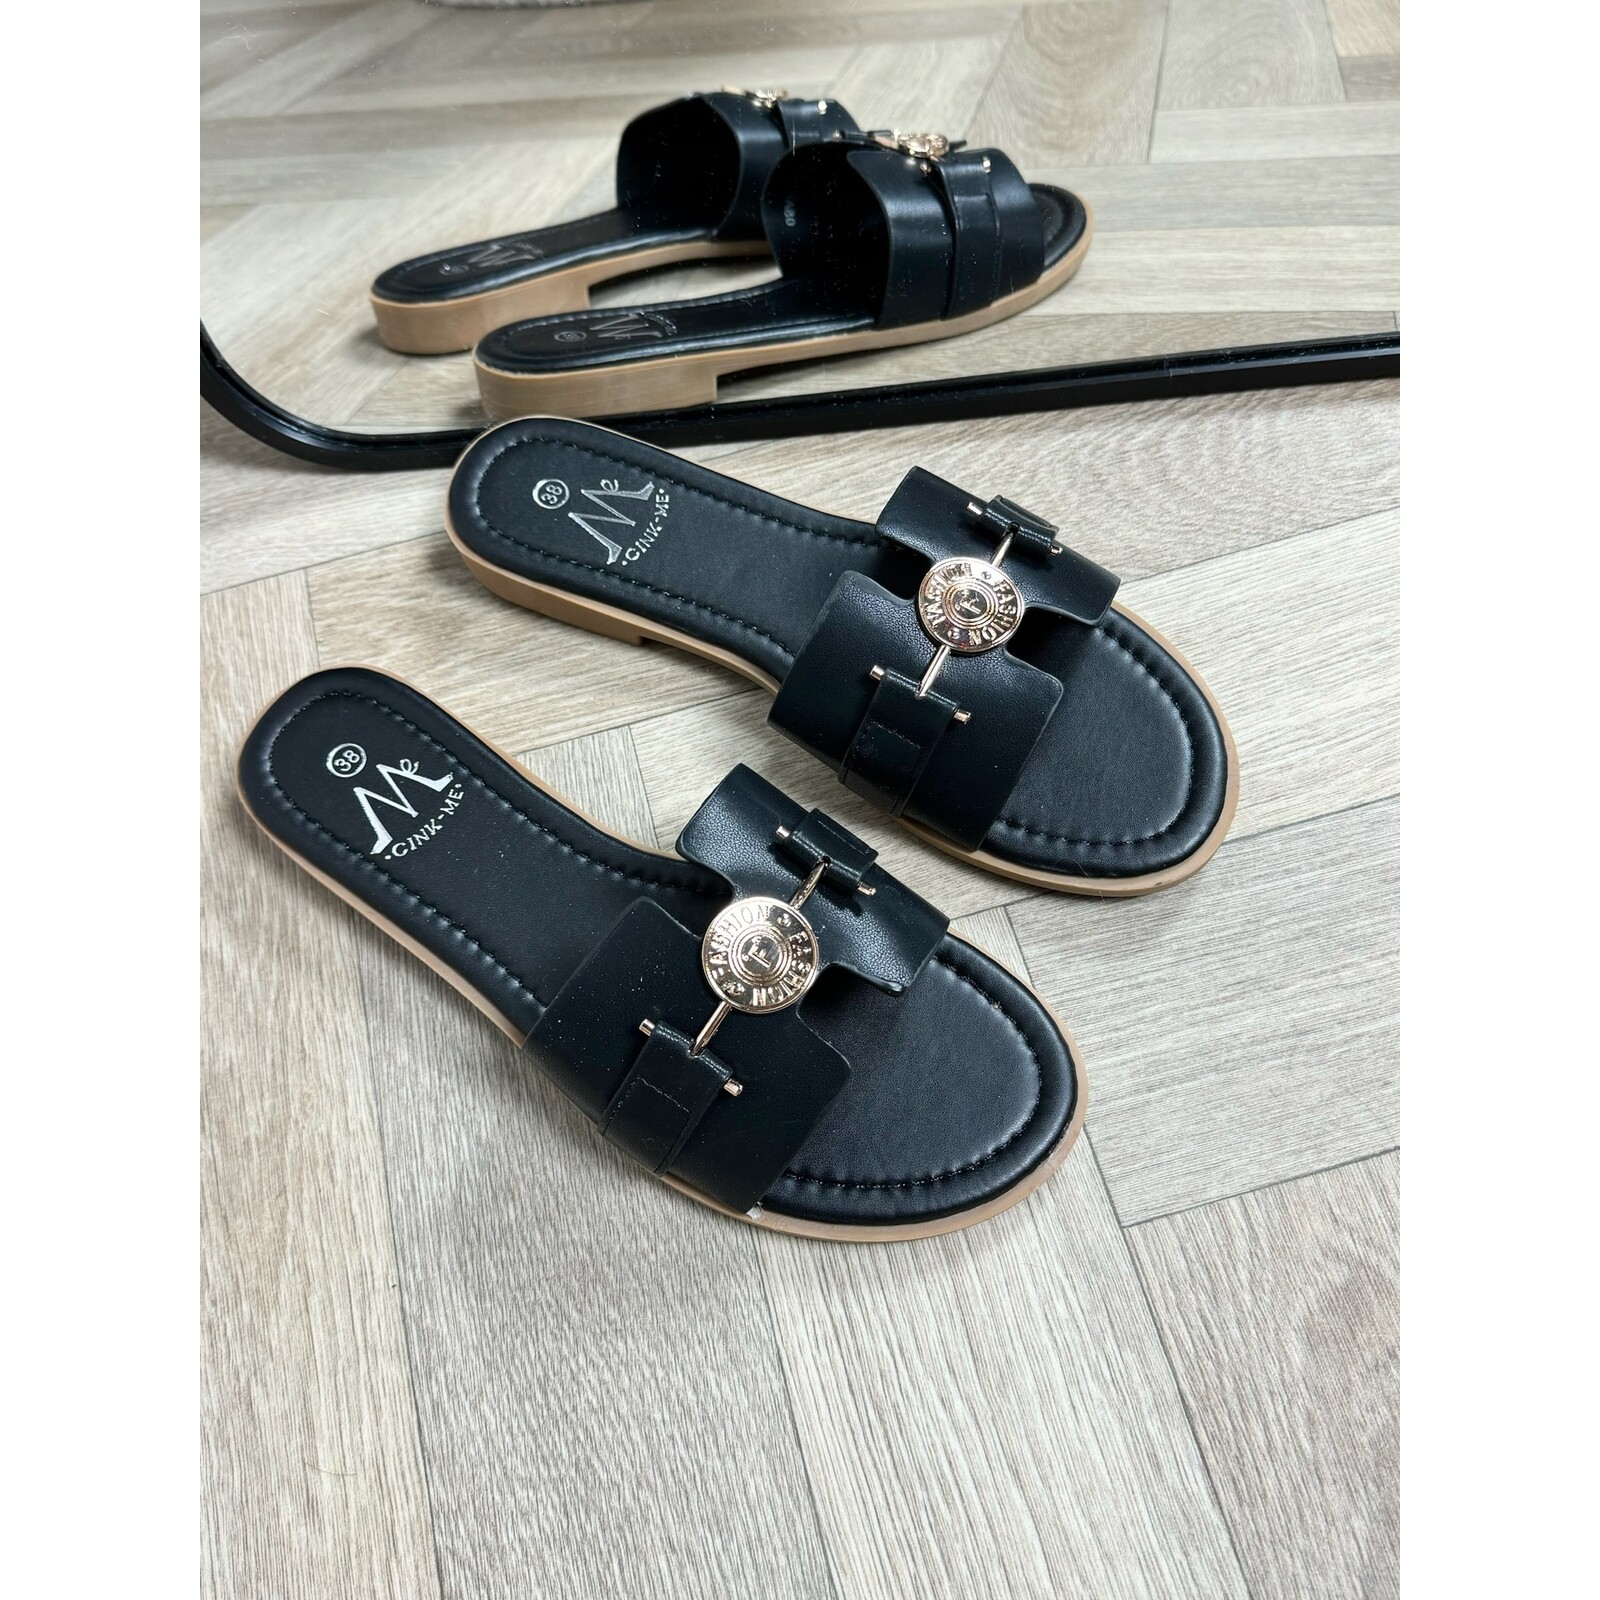 Slippers  Lucie Black  05A1-16 (WEB ONLY)